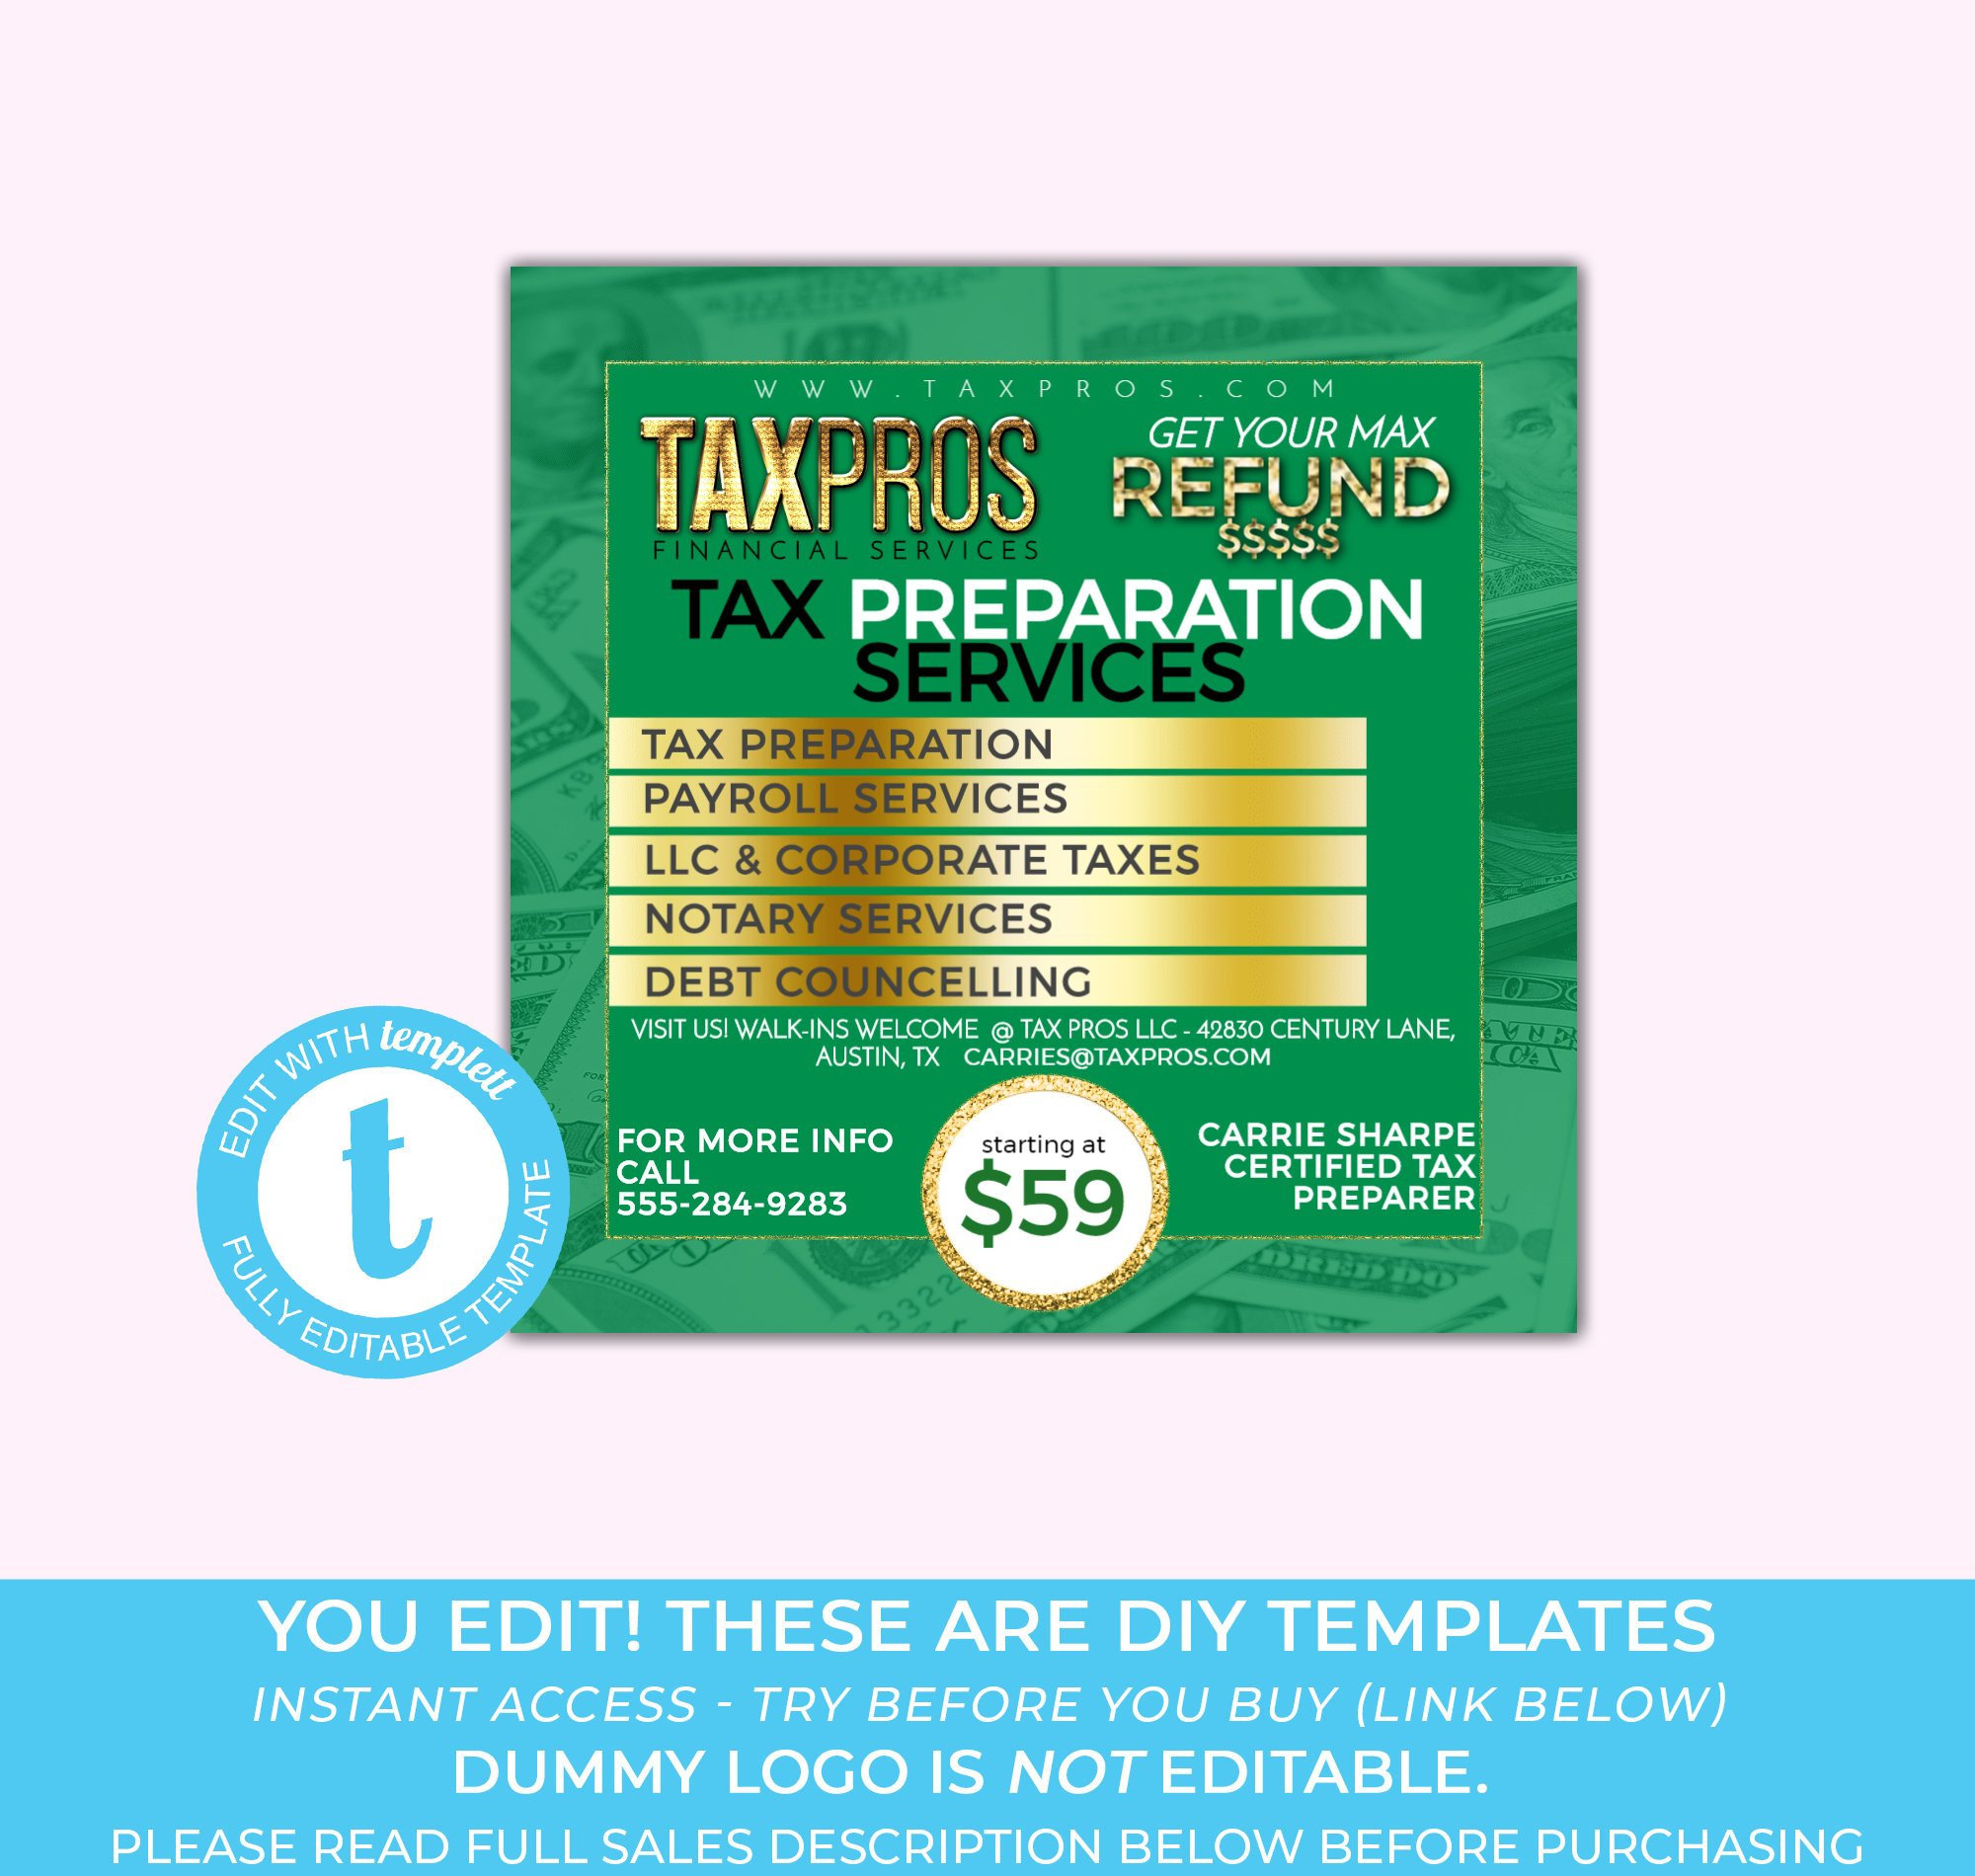 Income Tax Preparer Flyer, Tax Services, Tax Professional, Accountant,  Financial Services, Return Prep, Taxes, Social Media Digital Flyer In Tax Preparer Flyer Template Intended For Tax Preparer Flyer Template